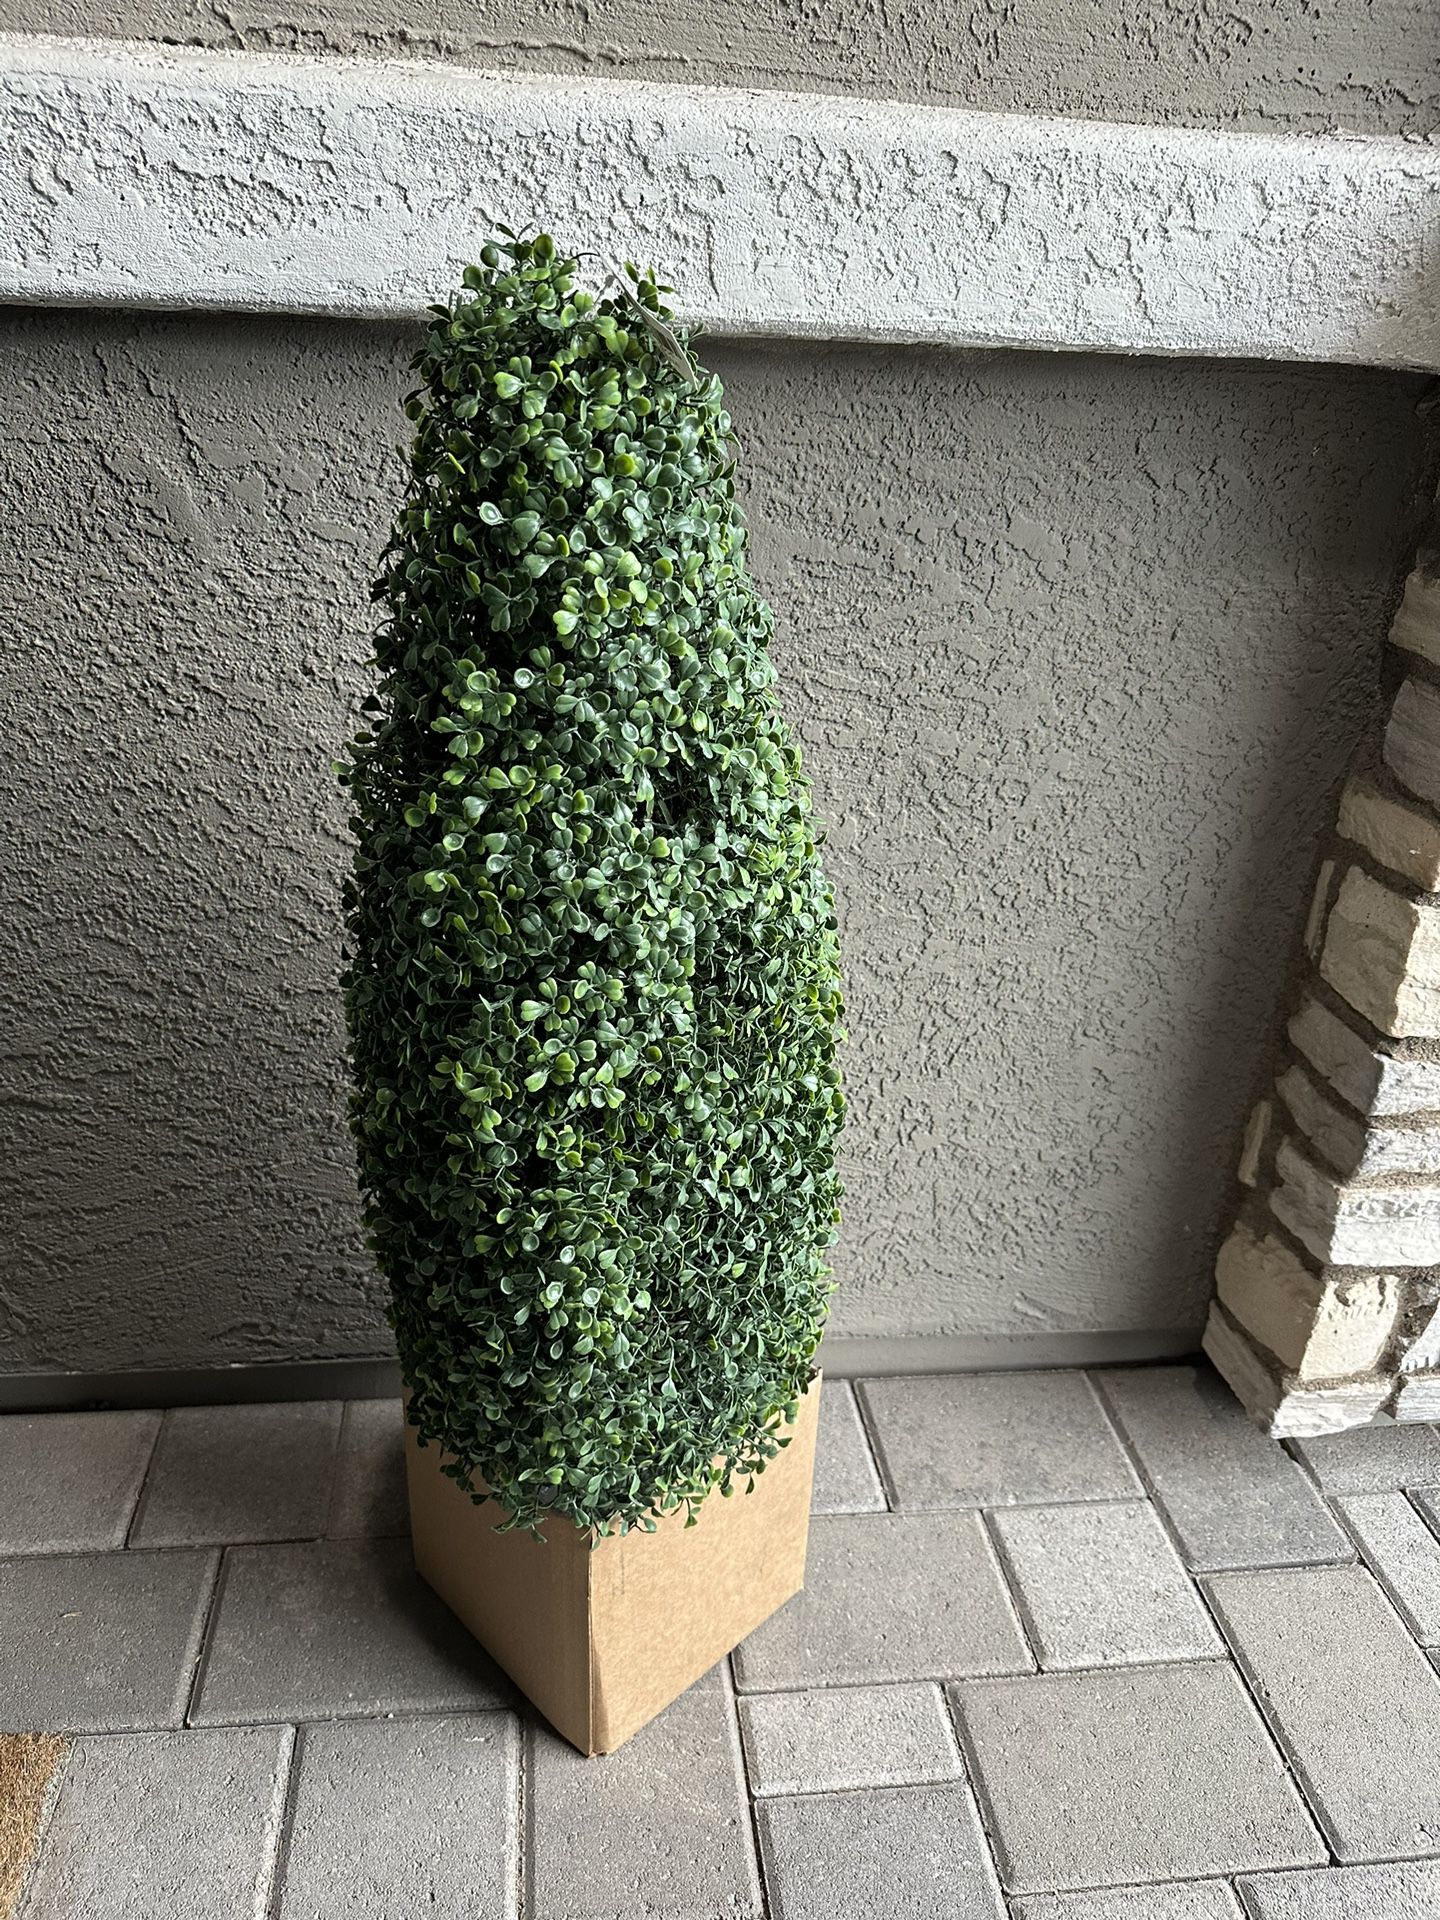 3 Ft ft. UV Resistant Indoor/Outdoor Boxwood Tower Topiary